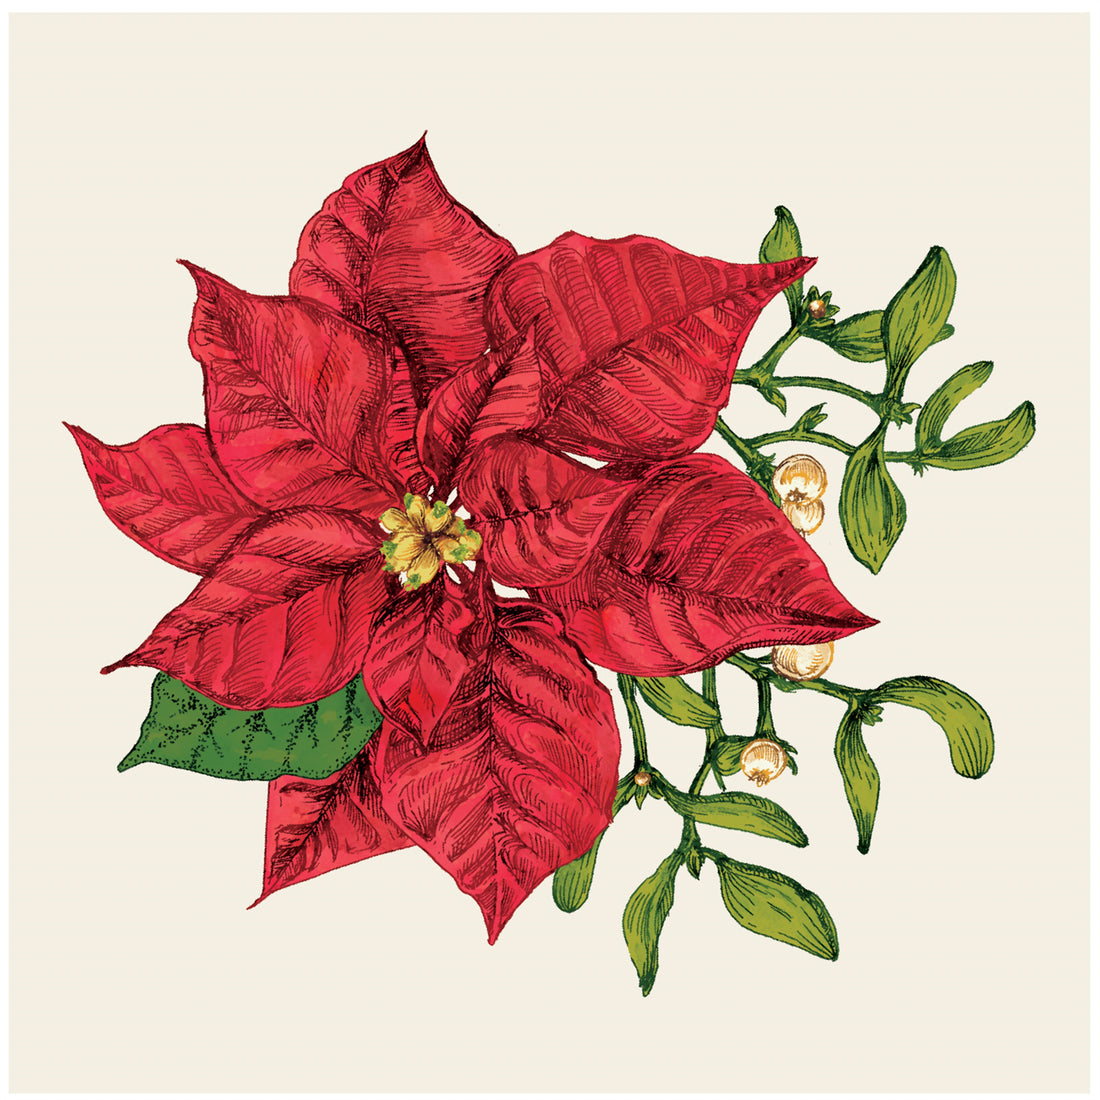 A square, cream cocktail napkin featuring a vintage-style illustration of a red poinsettia bloom with green and white mistletoe. 